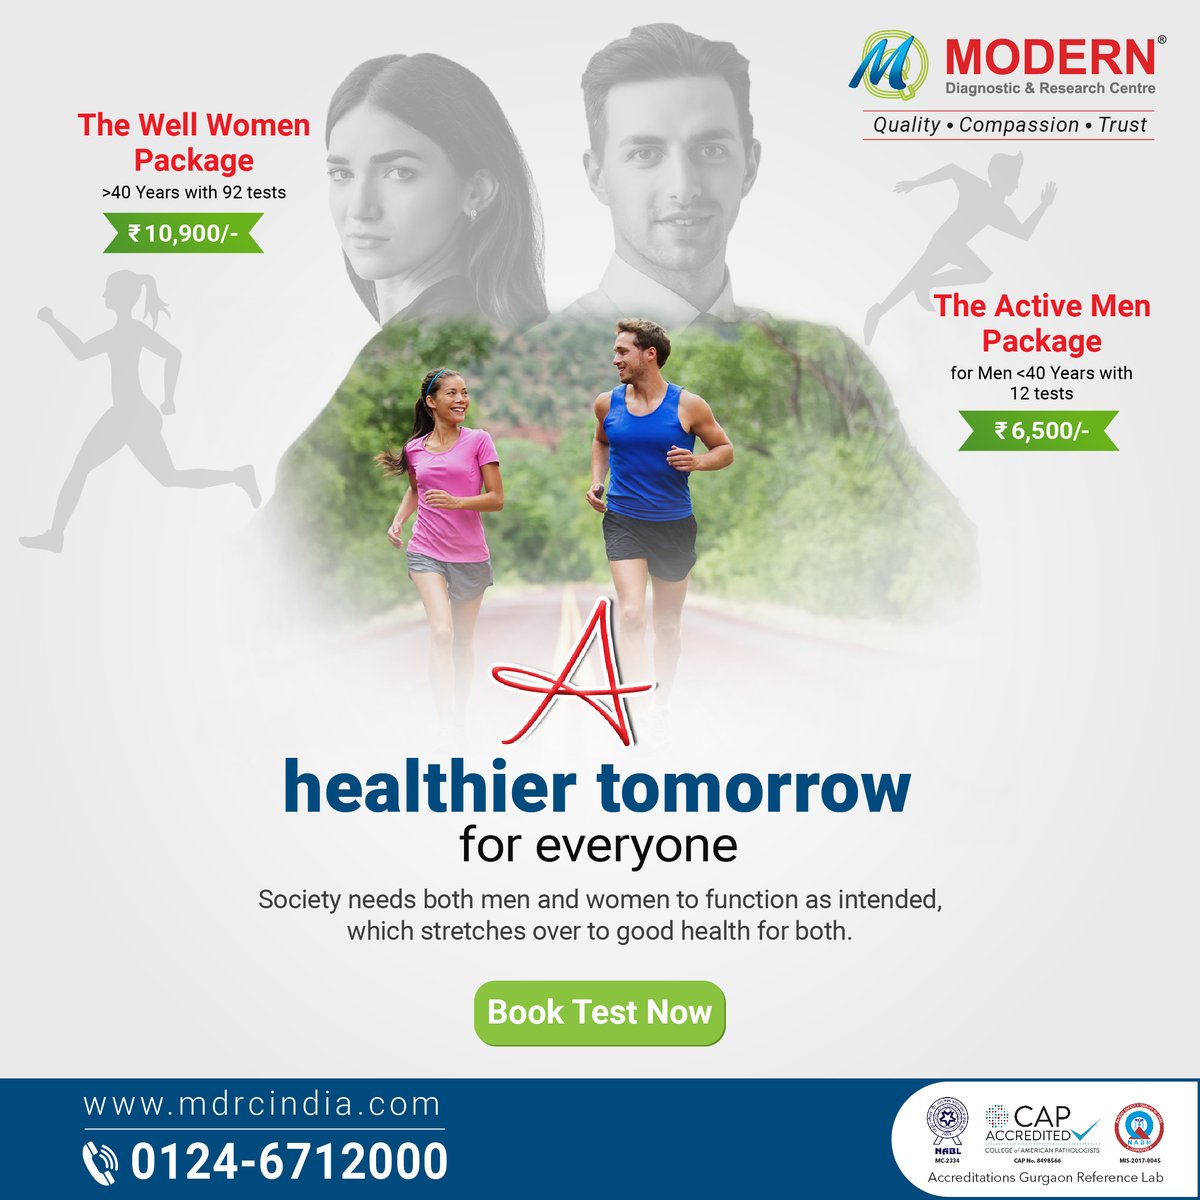 MDRC India brings comprehensive #healthpackages for both men & women. So, take a break from your busy schedule & book a test.

•  The Active #menpackage for Men <40 Years (12 tests) 
•  The Well #womenpackage >40 Years (92 tests)
 
mdrcindia.com